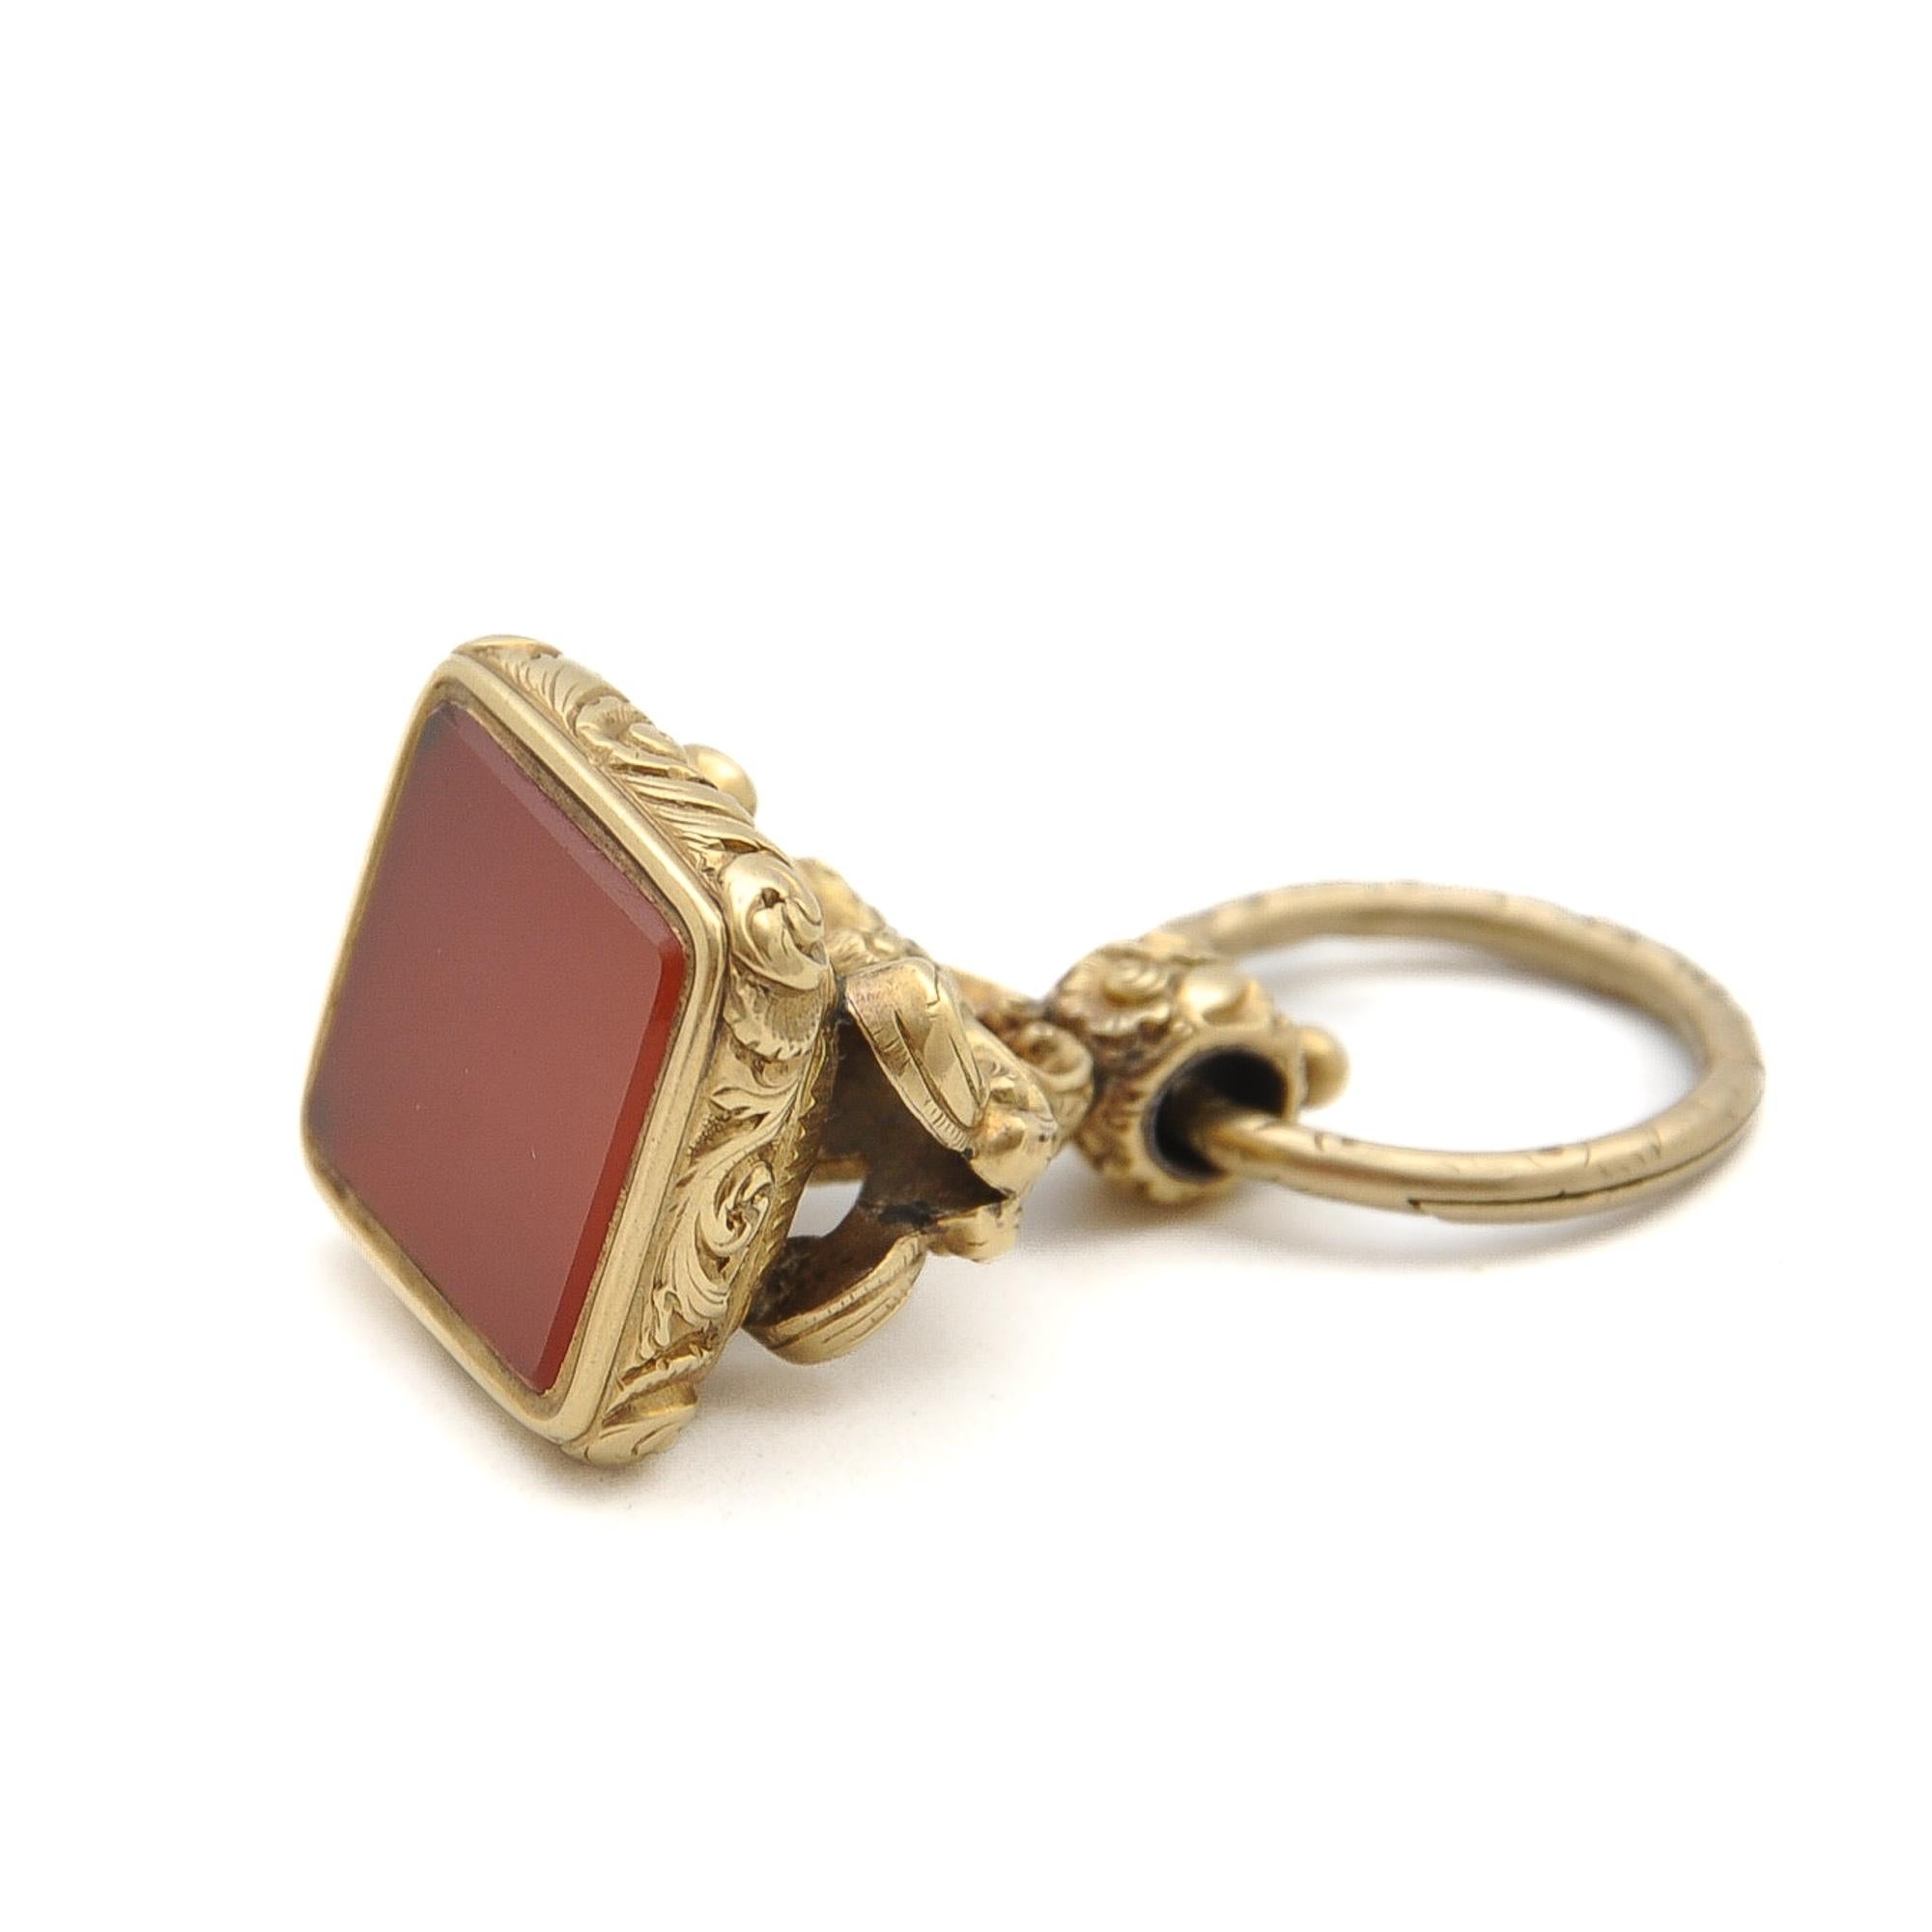 Antique Victorian 15K Gold and Carnelian Ornate Fob Charm Pendant In Good Condition For Sale In Rotterdam, NL